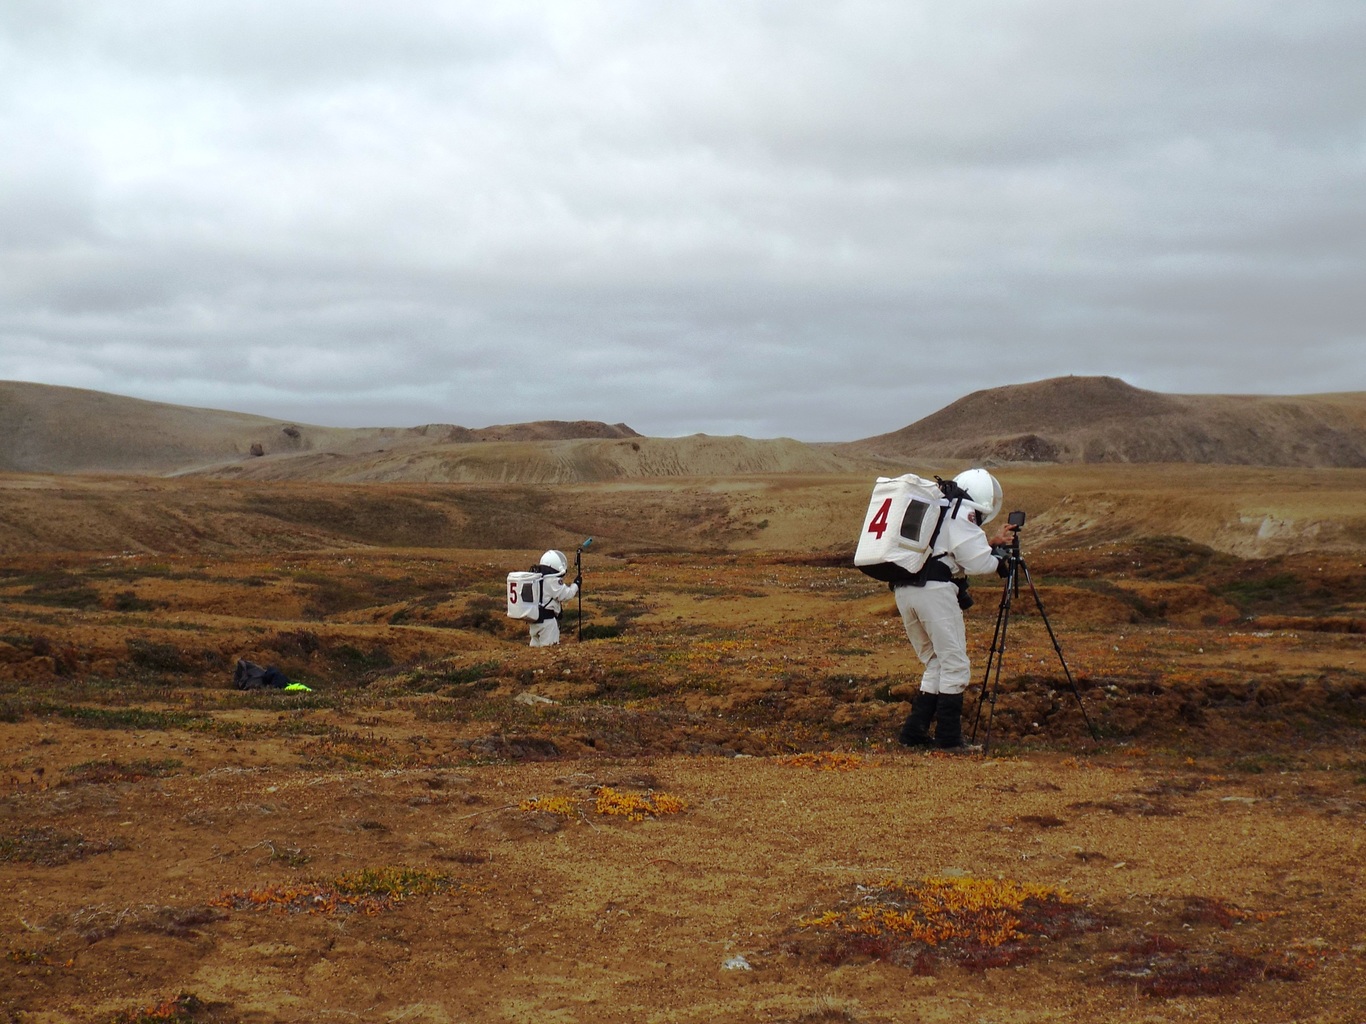 Yusuke Murakami (left) and Paul Knightly (right) carrying out photographic surveys on polygons in Haughton crater. (Jonathan Clarke)